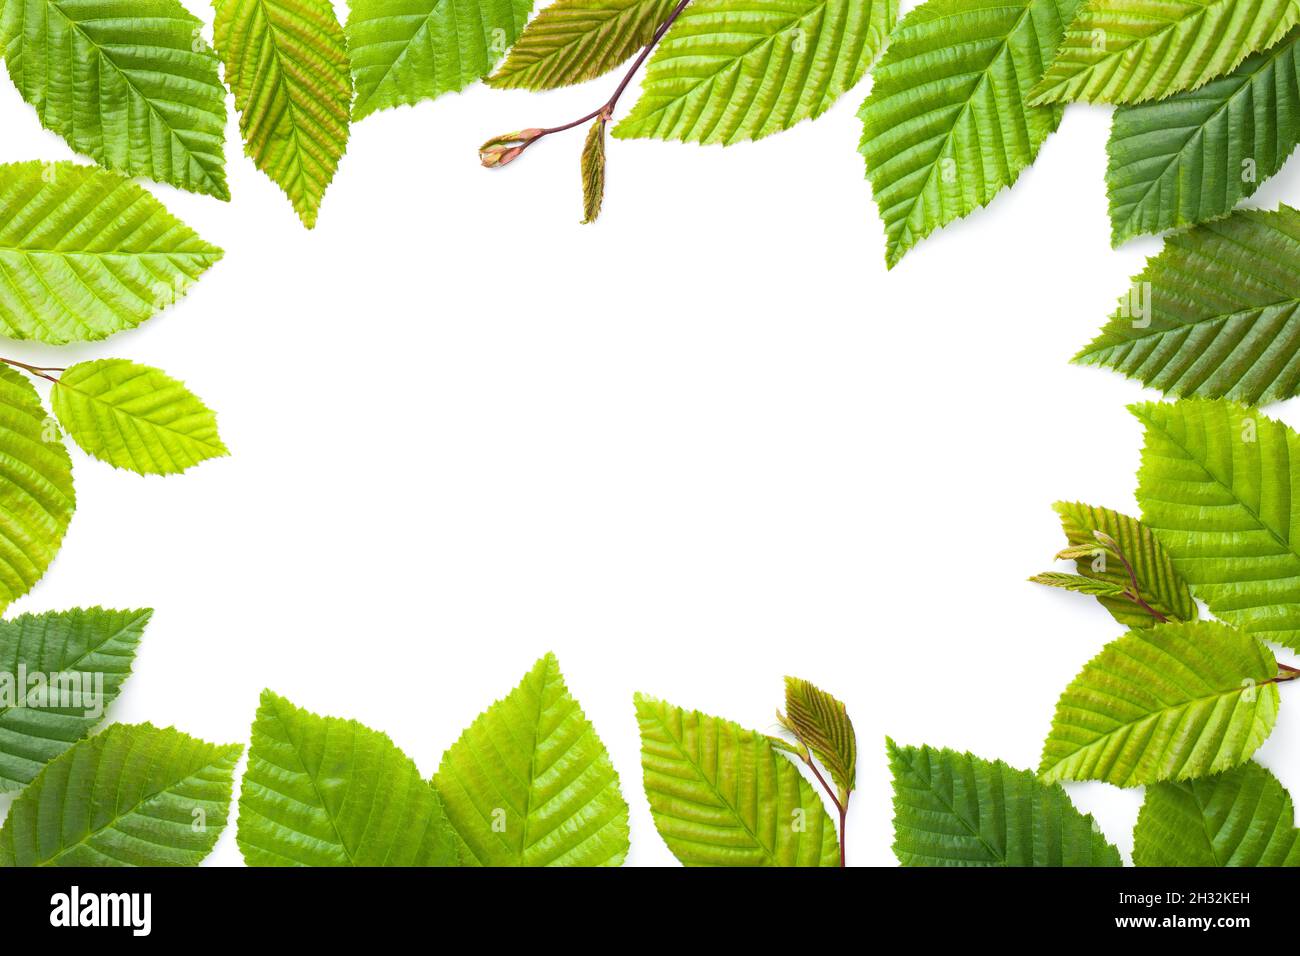 Leaves frame. Hornbeam leaves isolated over white background. Flat lay, top view Stock Photo